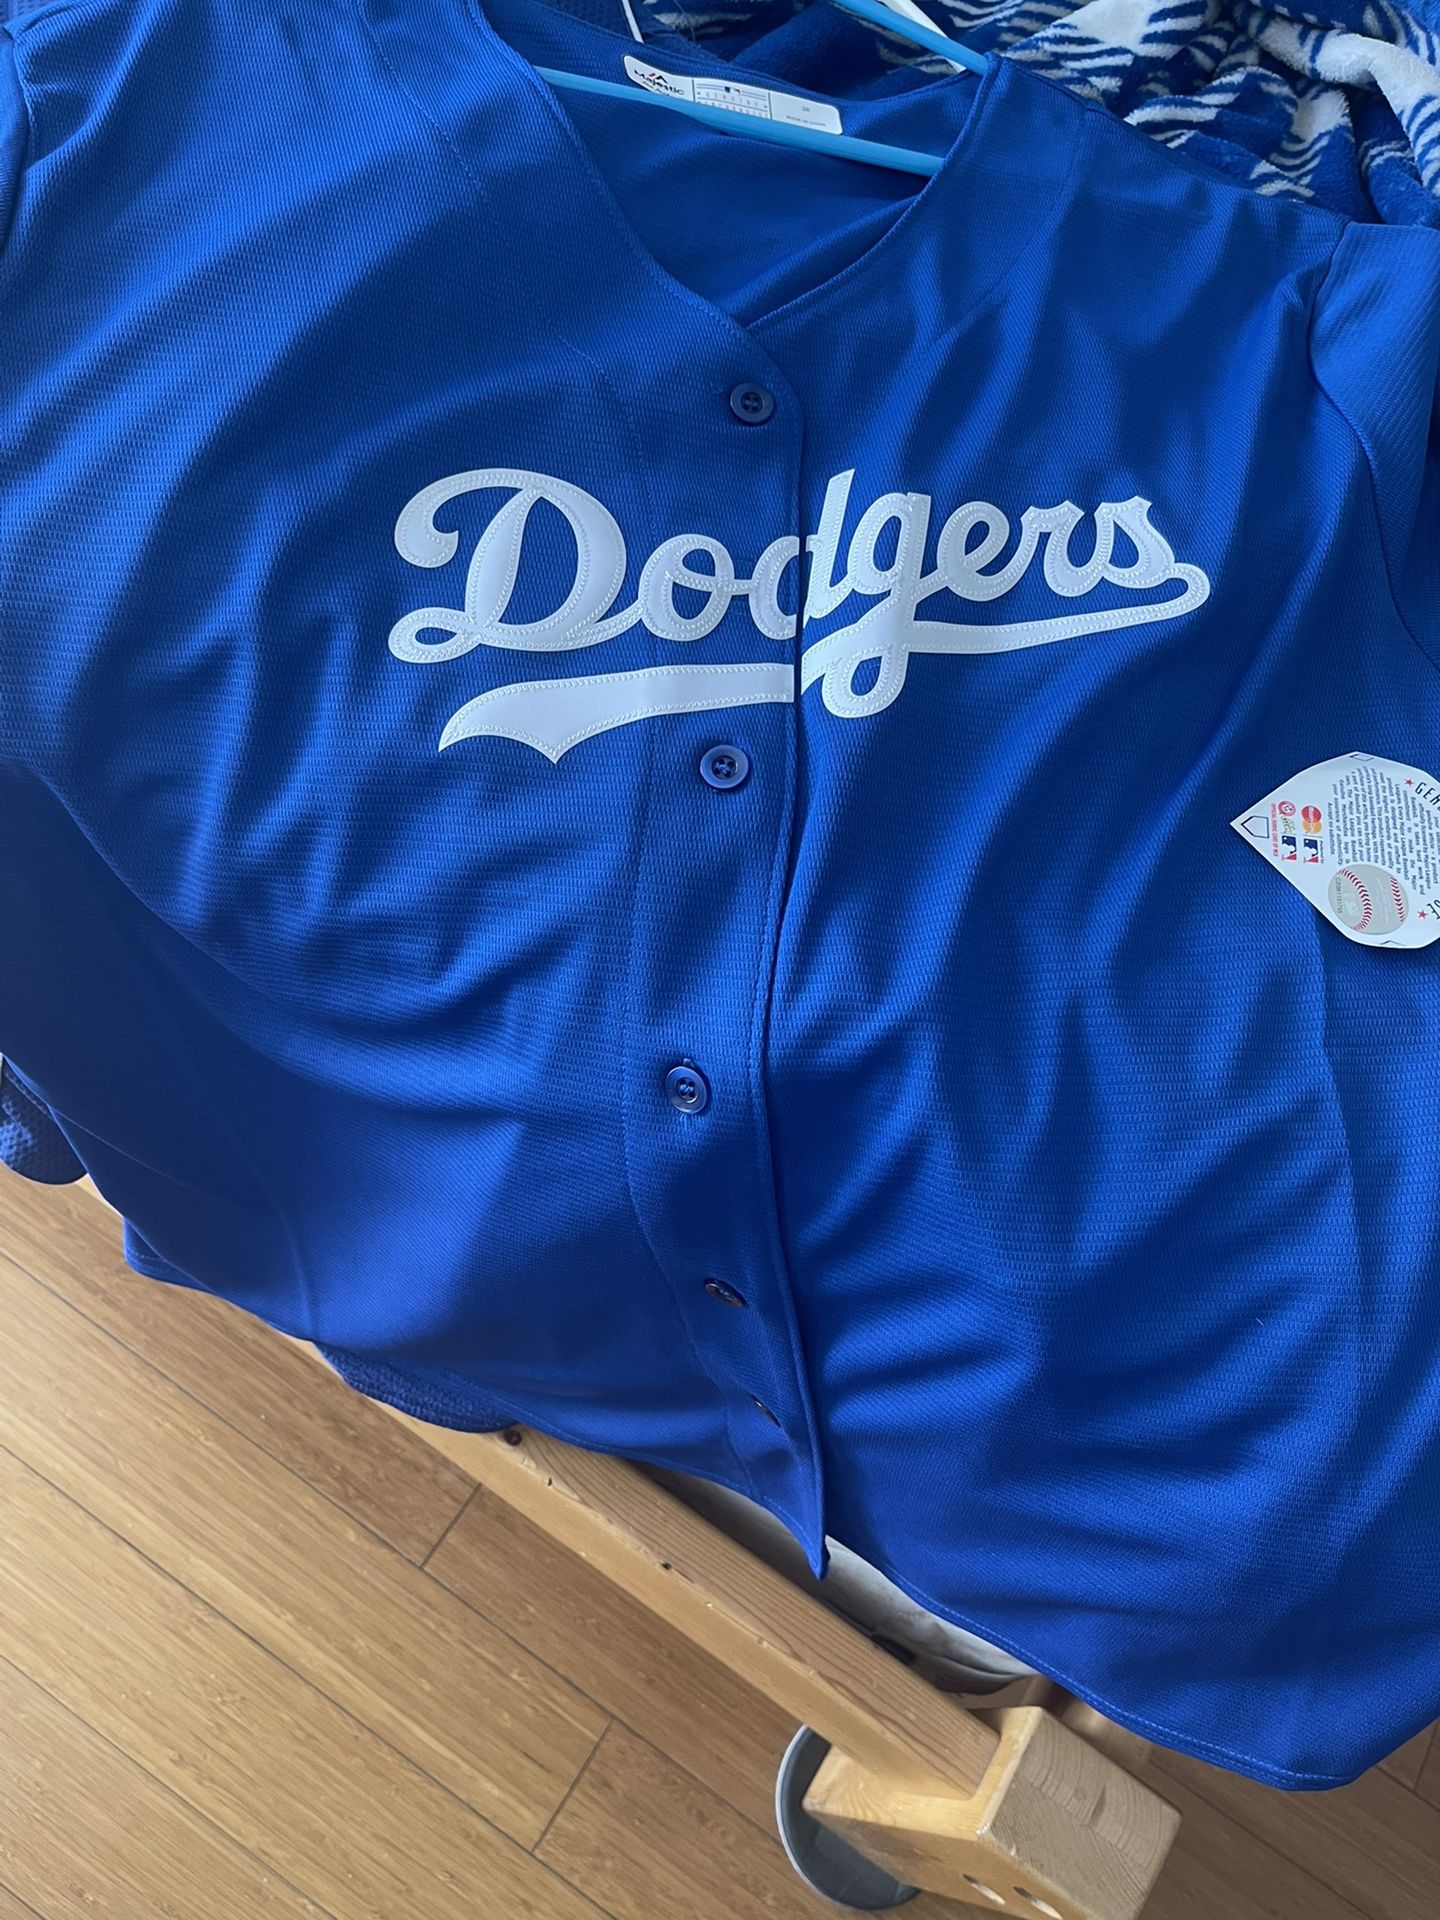 Dodgers Gear for Sale in City Of Industry, CA - OfferUp